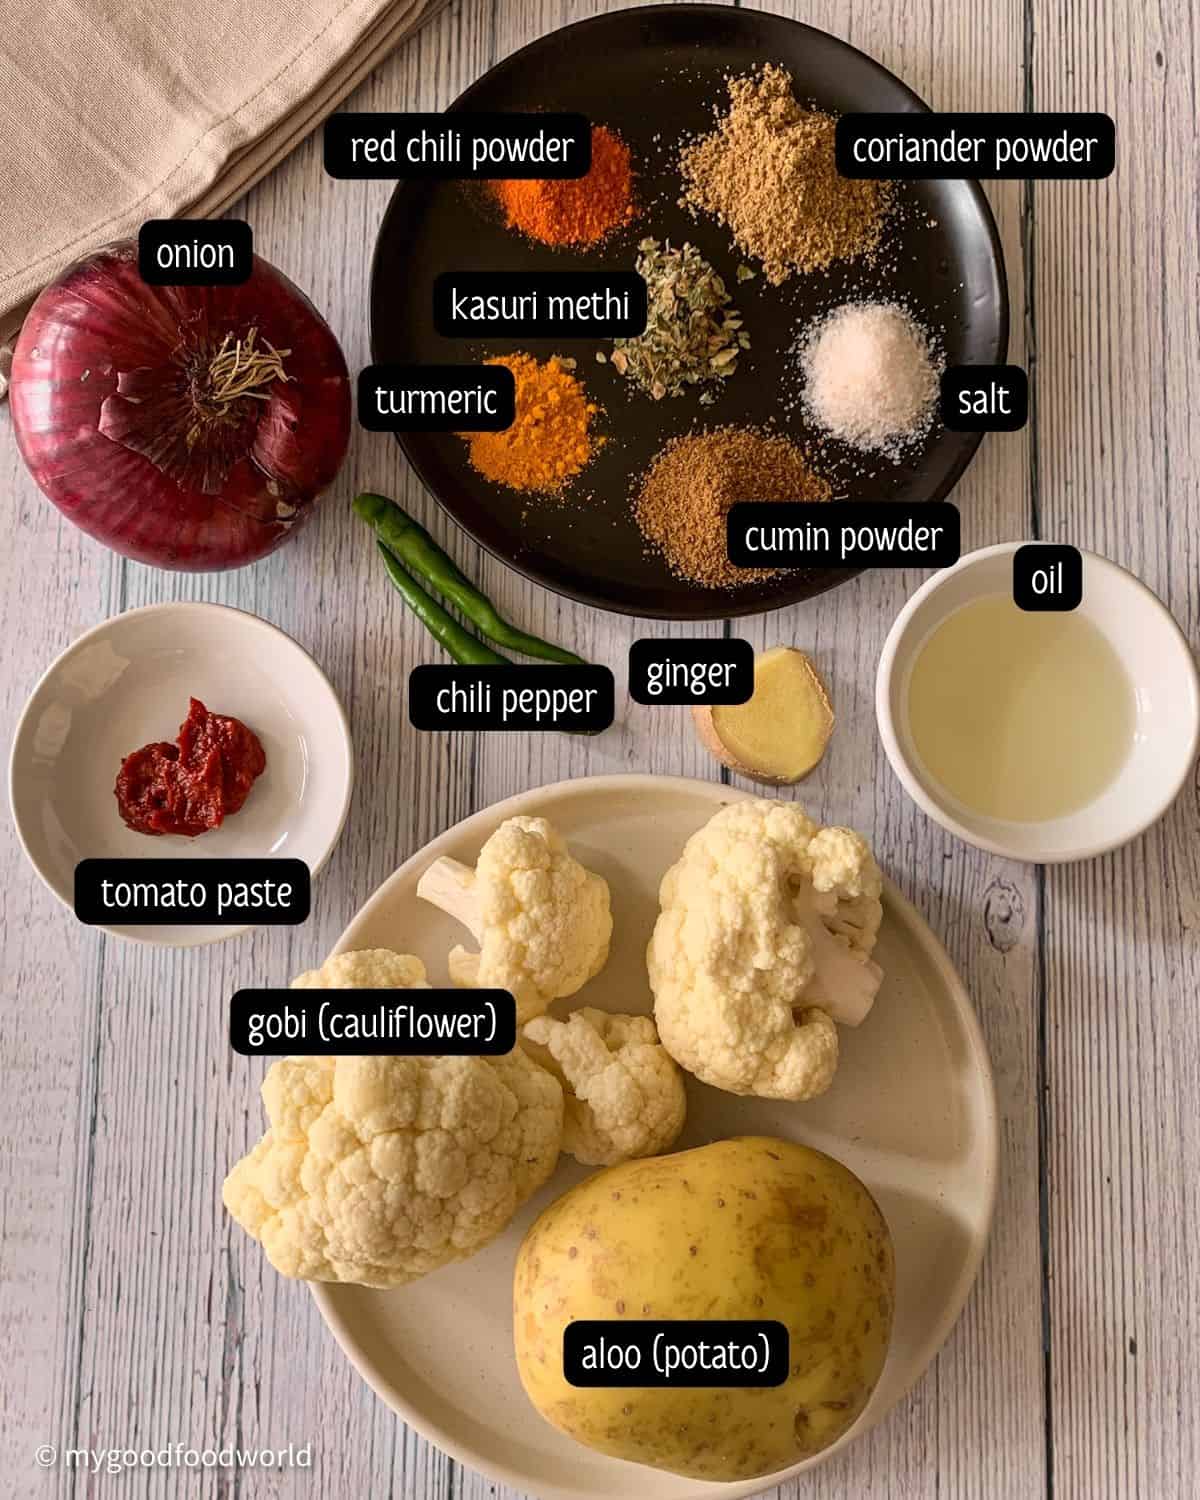 Various Indian spices such as red chili powder, kasuri methi, coriander powder and ingredients for aloo gobi sabzi are placed on a wooden table.